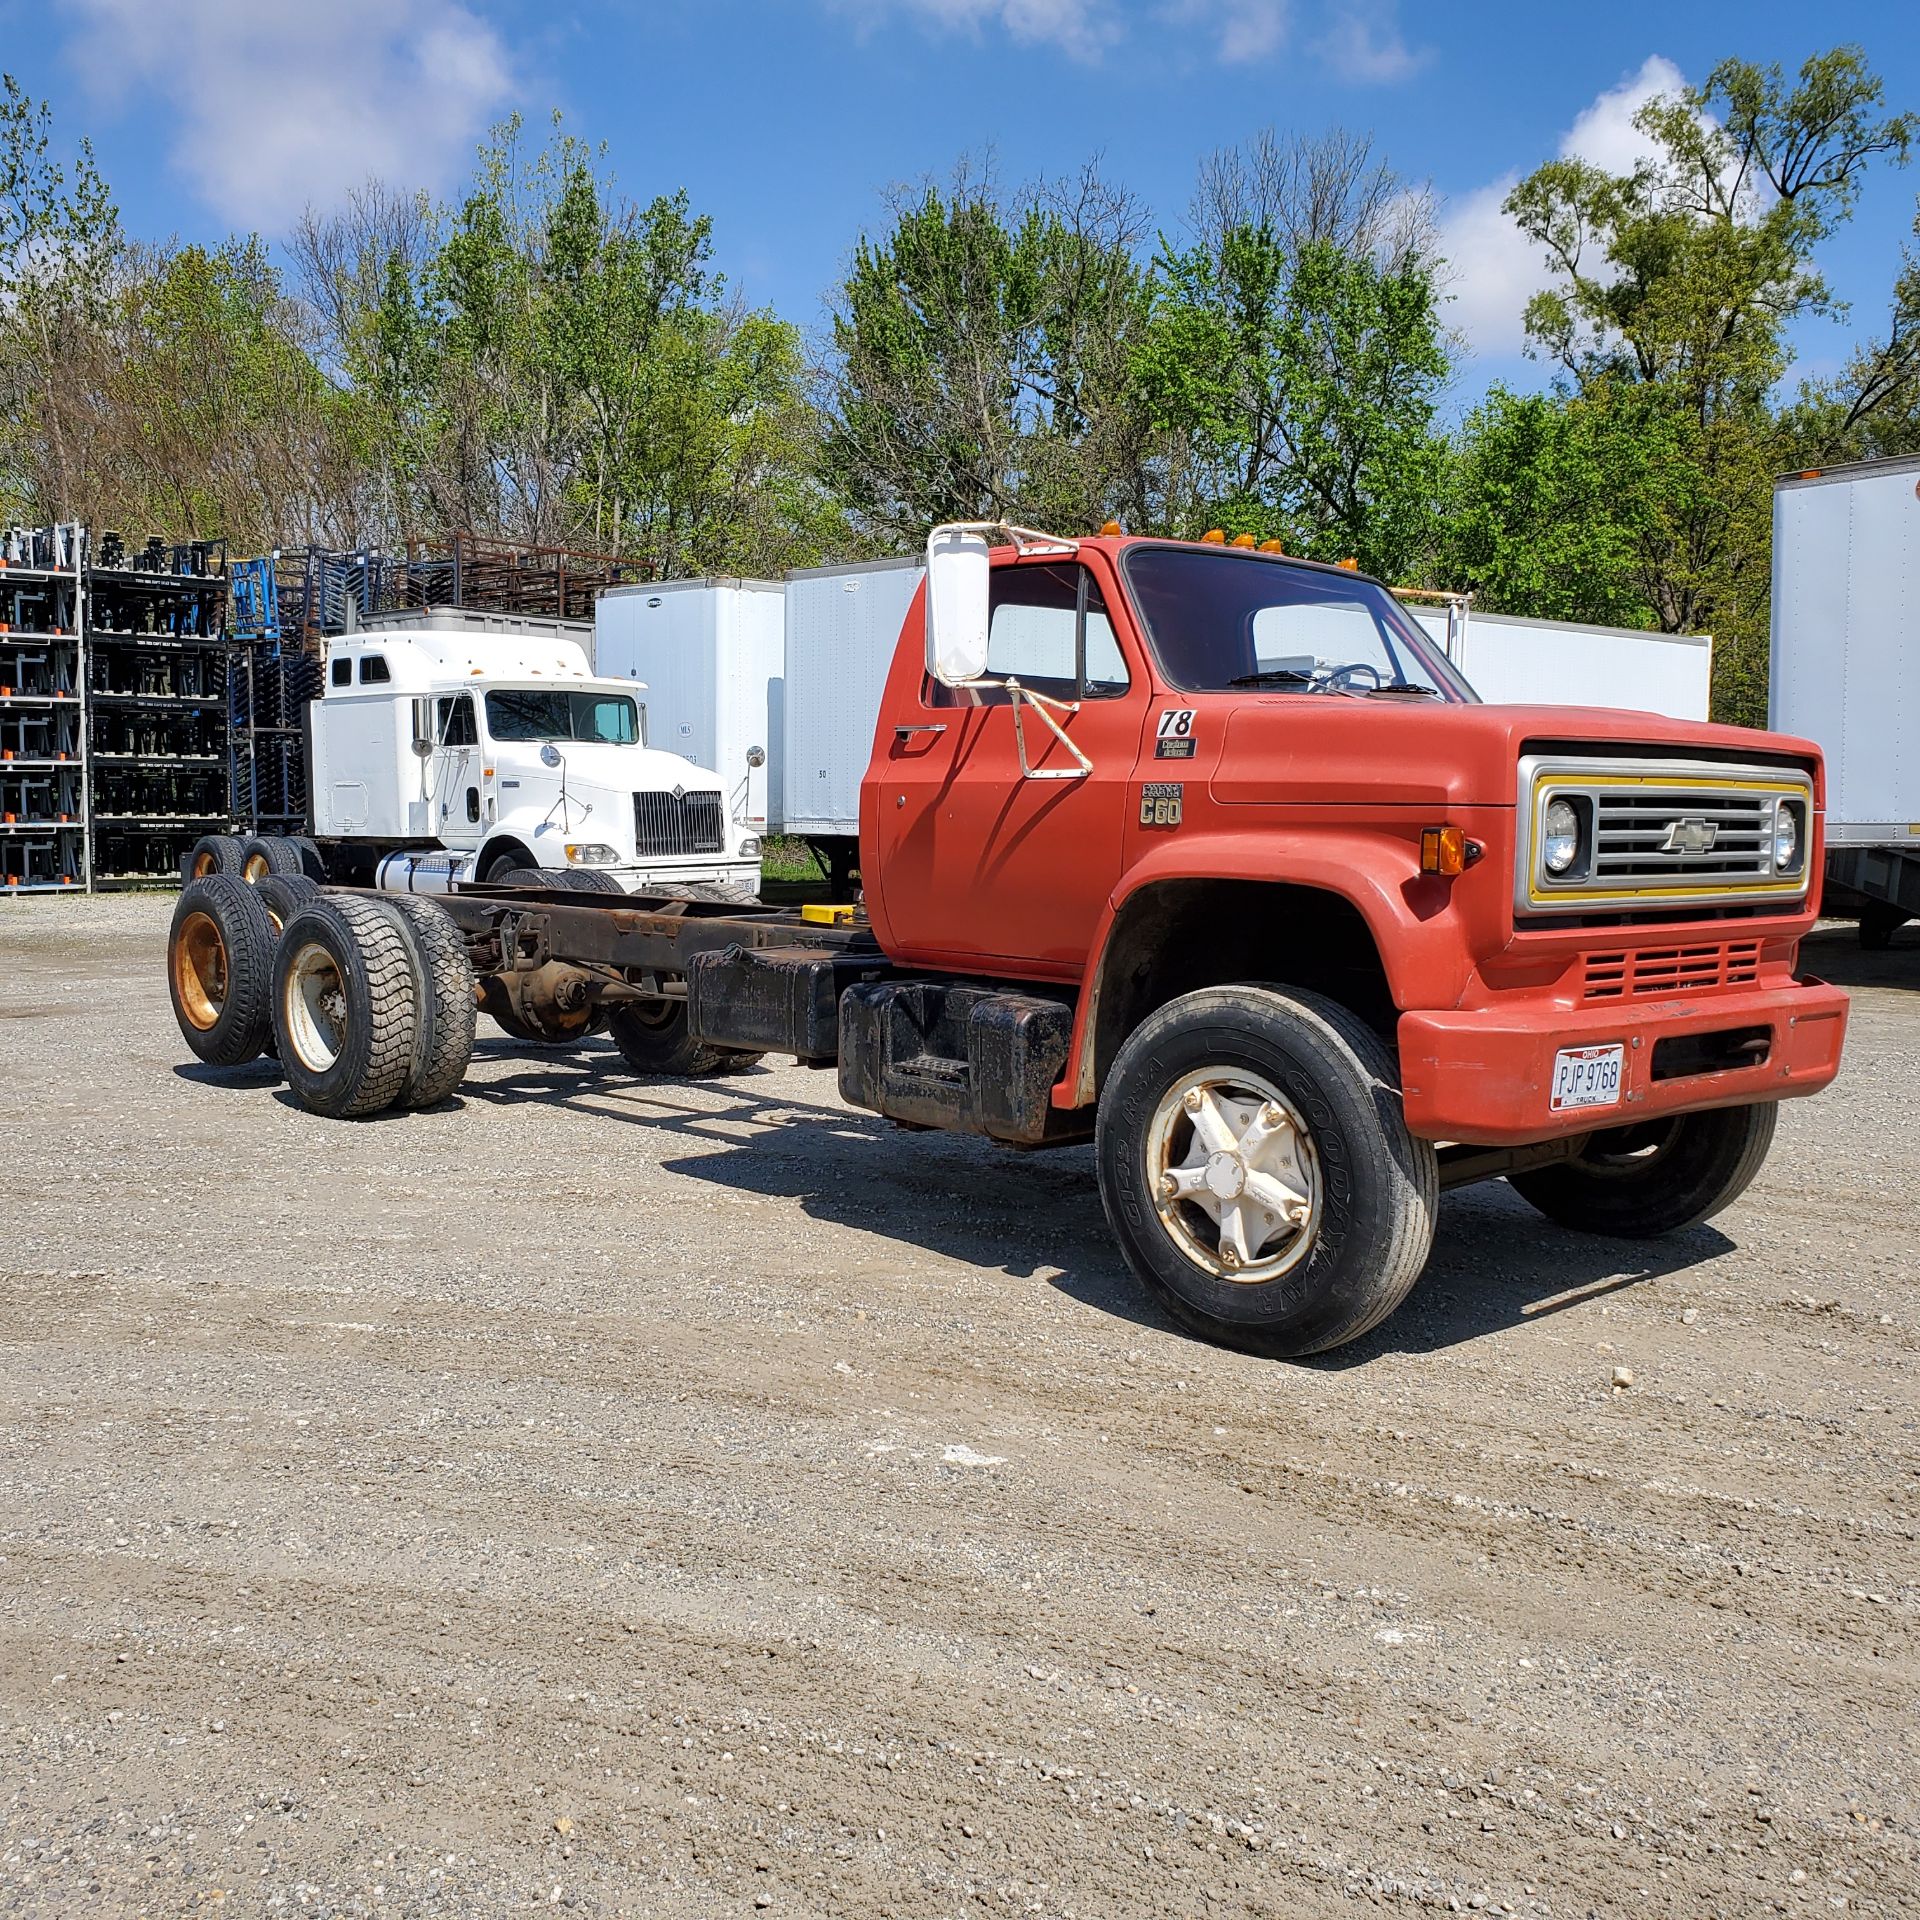 1977 Chevrolet C60 Cab and Chassis, Single Axle w/ Dual Tires and Tag Axle, 5 Speed Transmission - Image 3 of 19